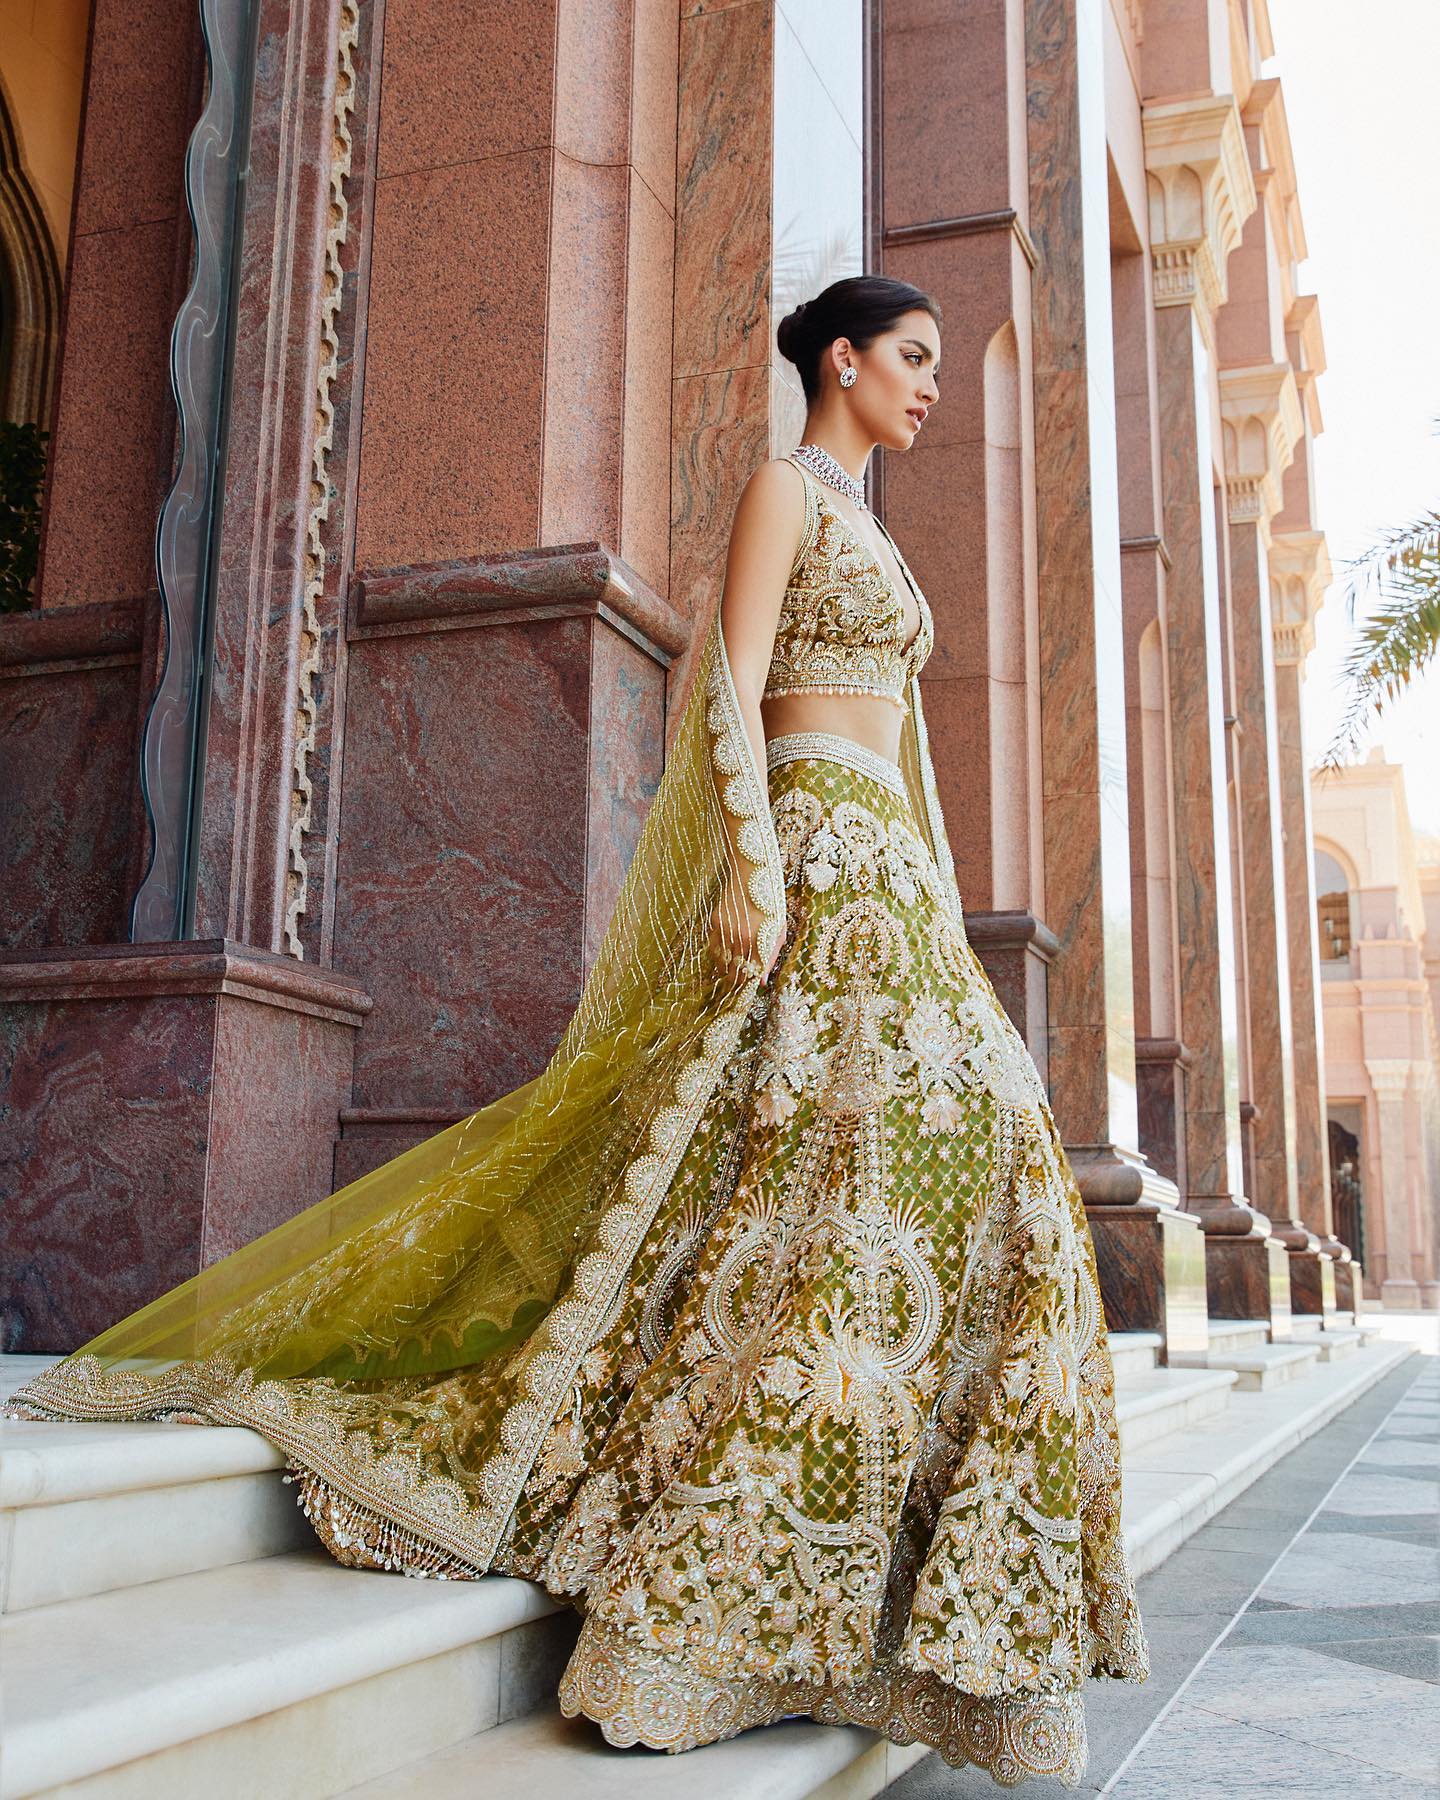 Which outfit do you prefer for an Indian wedding? Saree or Lehenga? - Quora